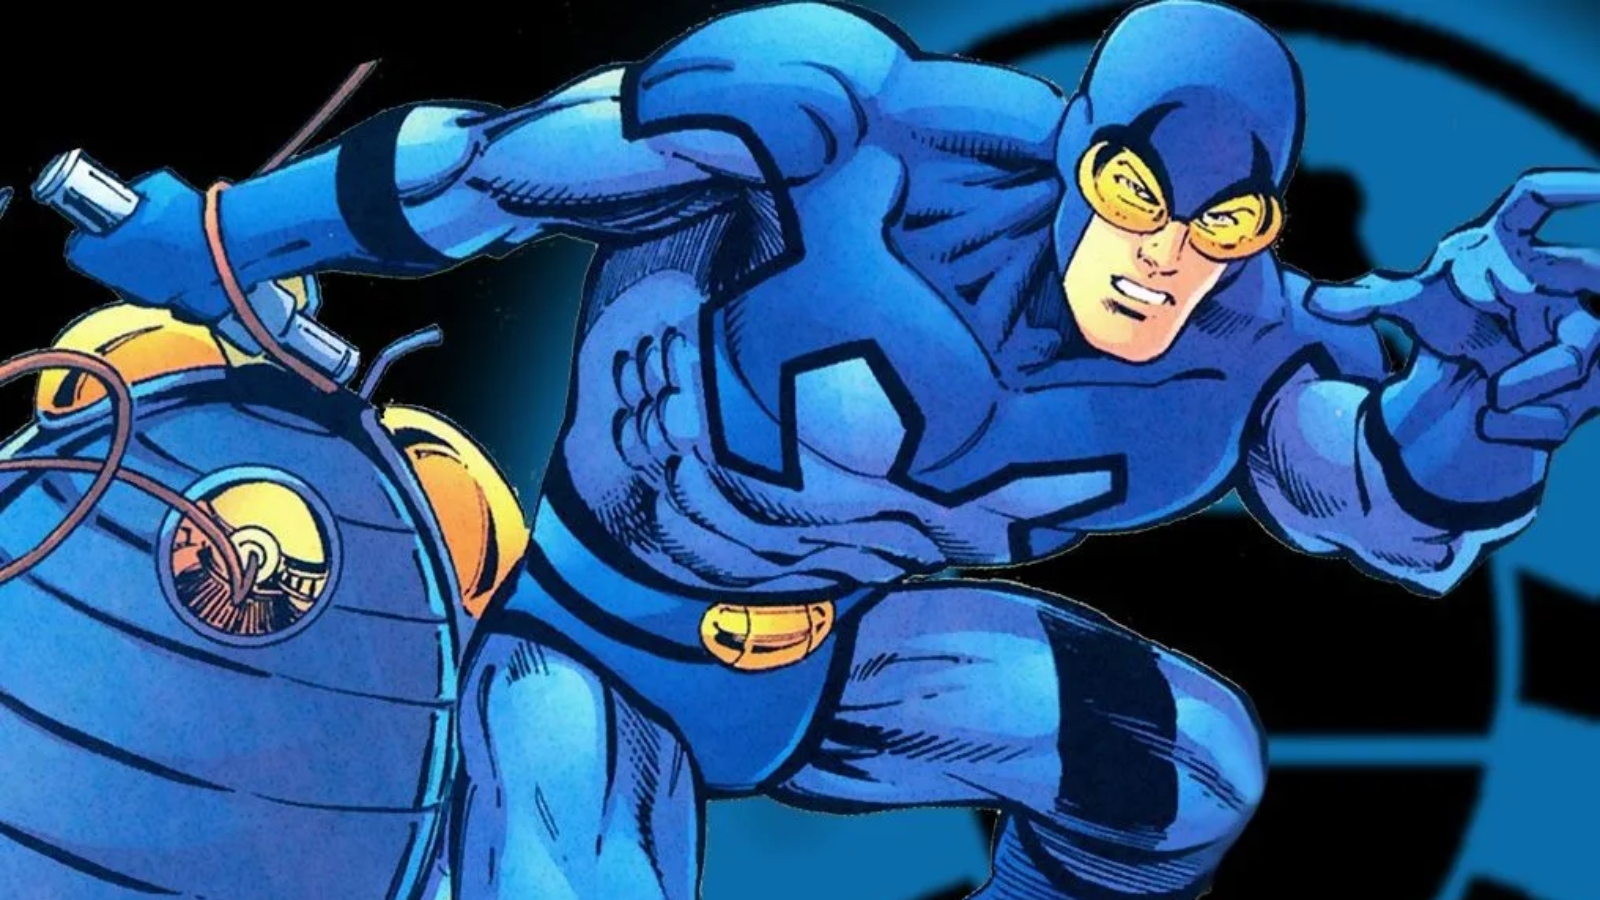 Ted Kord/Blue Beetle from DC Comics